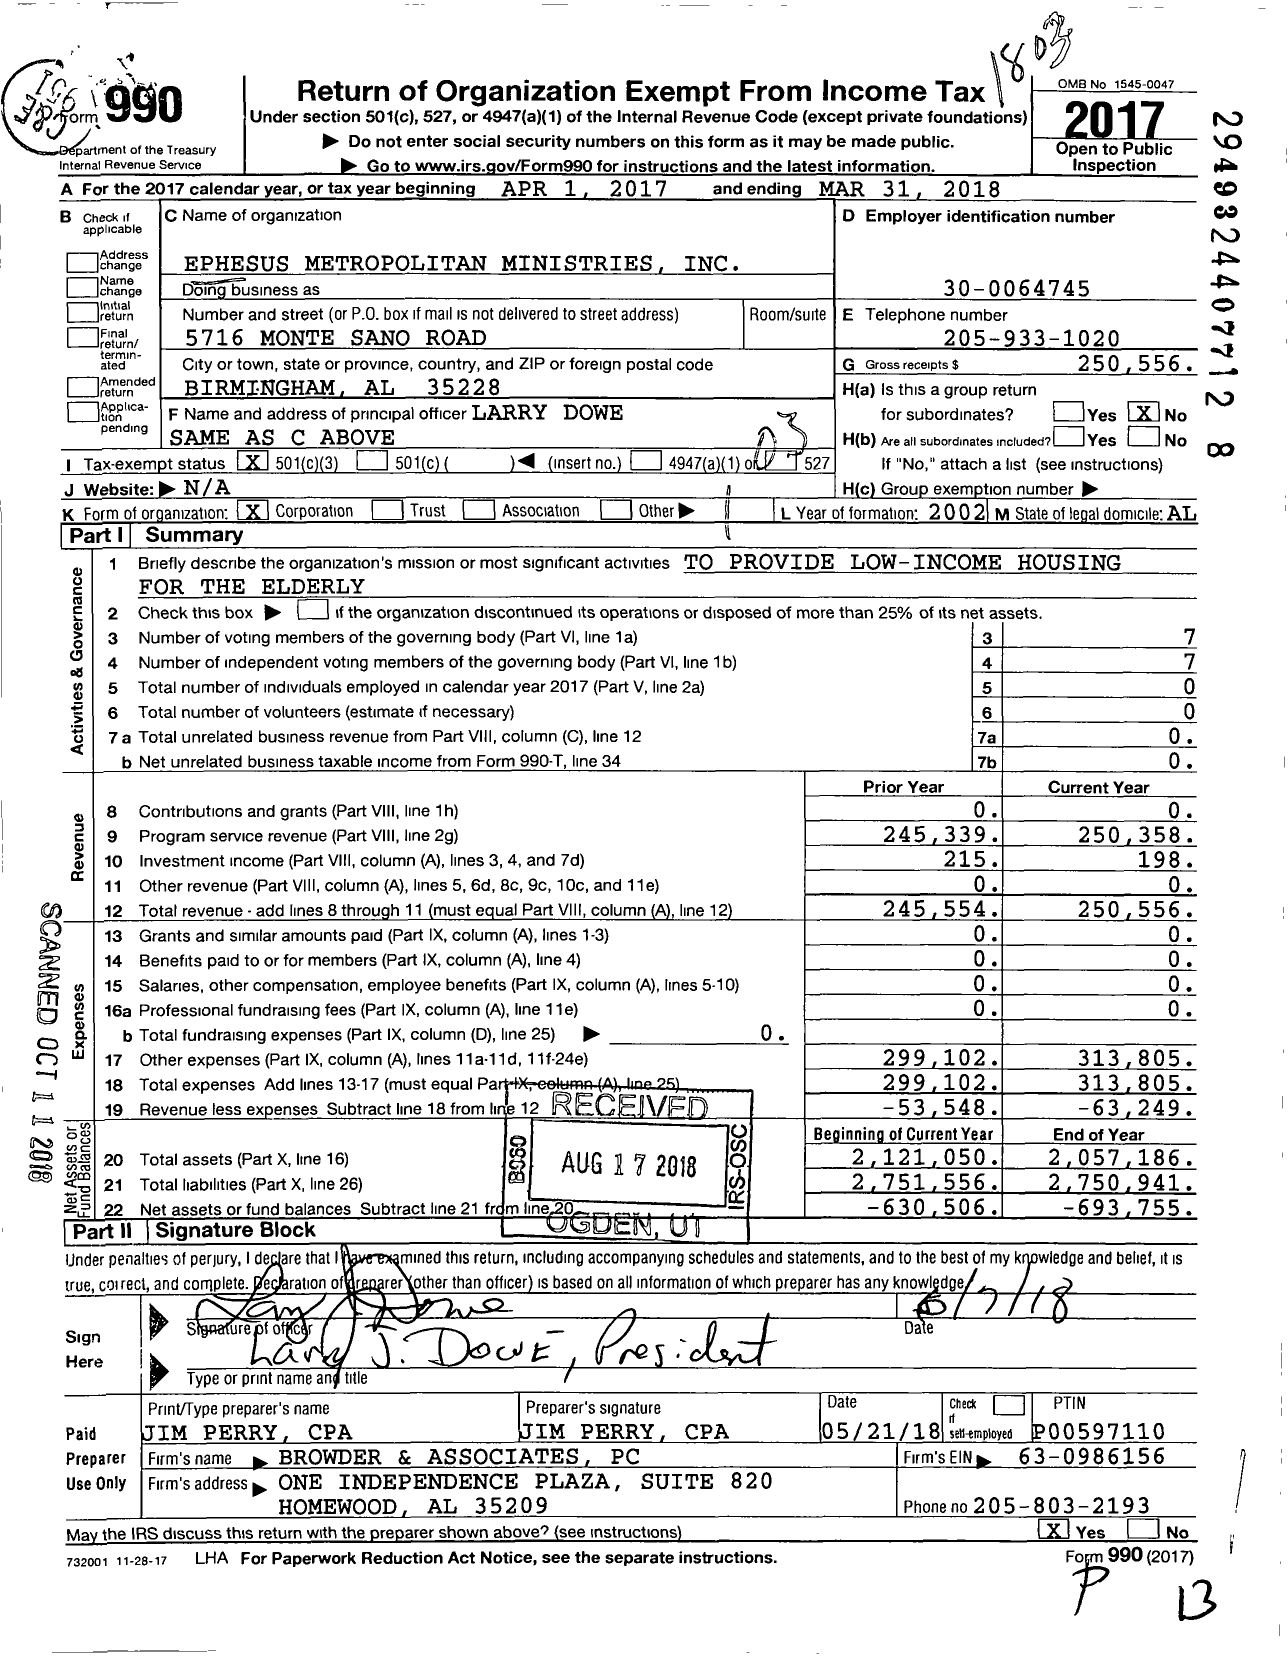 Image of first page of 2017 Form 990 for Ephesus Metropolitan Ministries